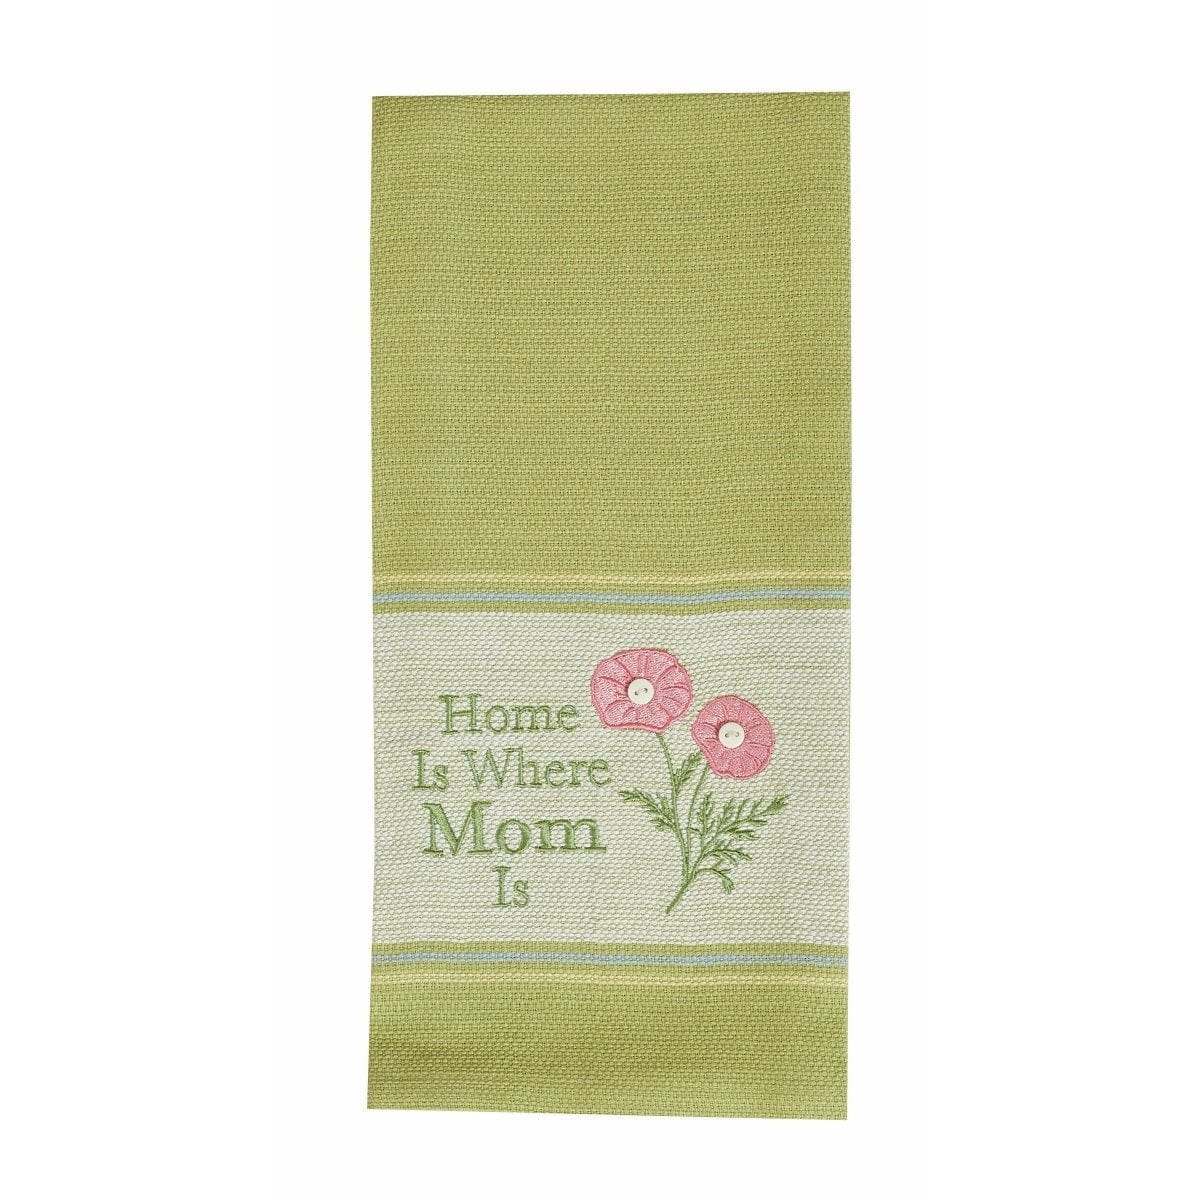 Garden Party home Is Where Mom Is Decorative Towel-Park Designs-The Village Merchant